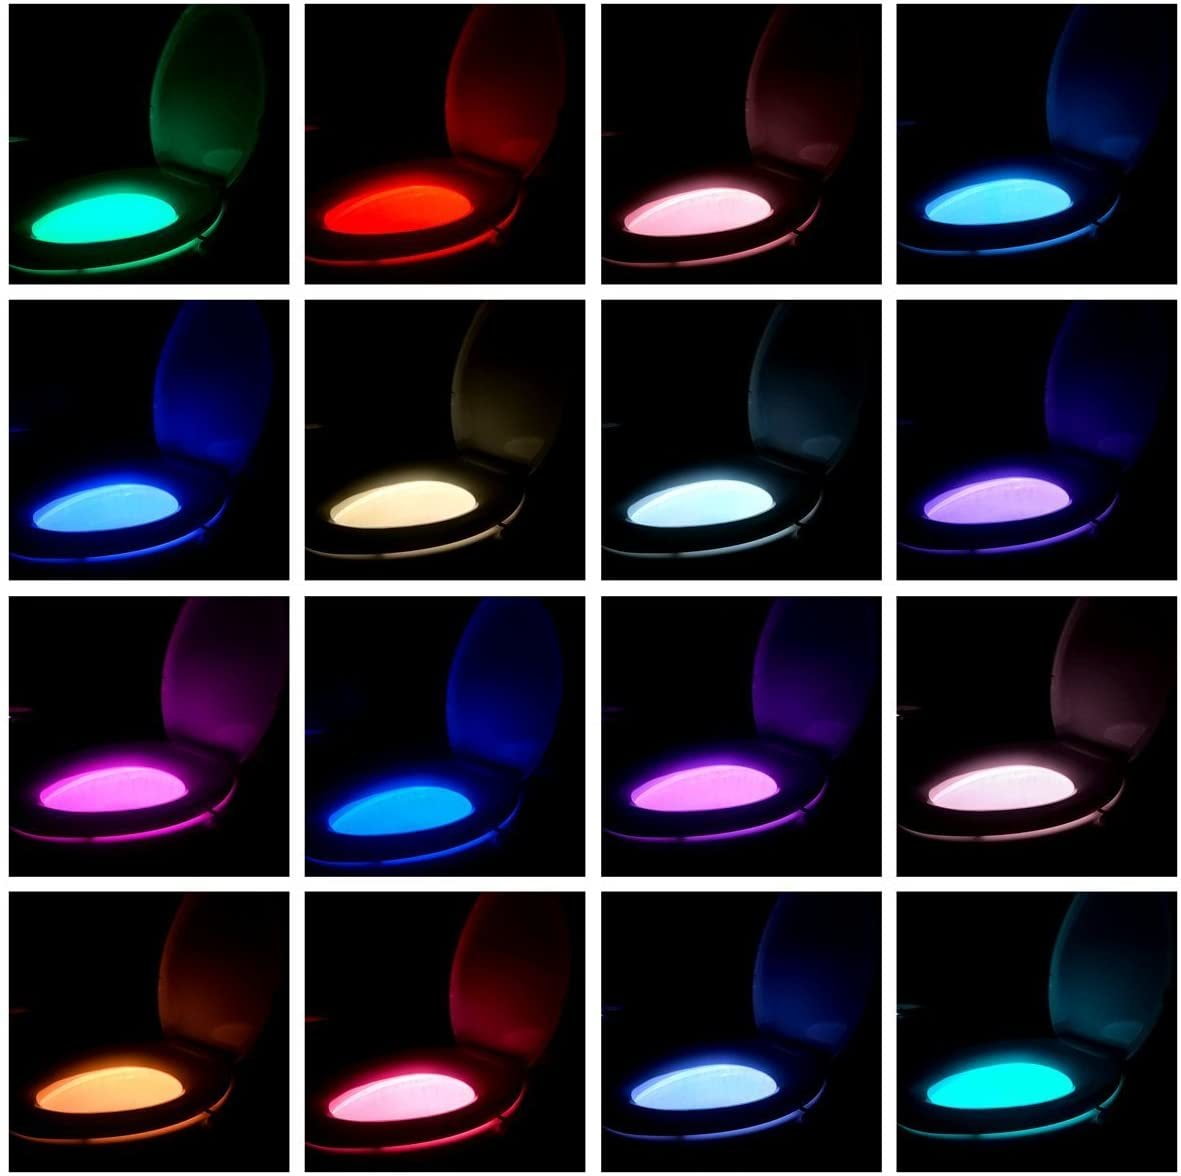 MIEFL Toilet Light Motion Sensor 16 Colors Changing (2 Pack),LED Glow Bowl Inside Toilet Light, Smart Night Light for Bathroom, Cool & Funny Ideal